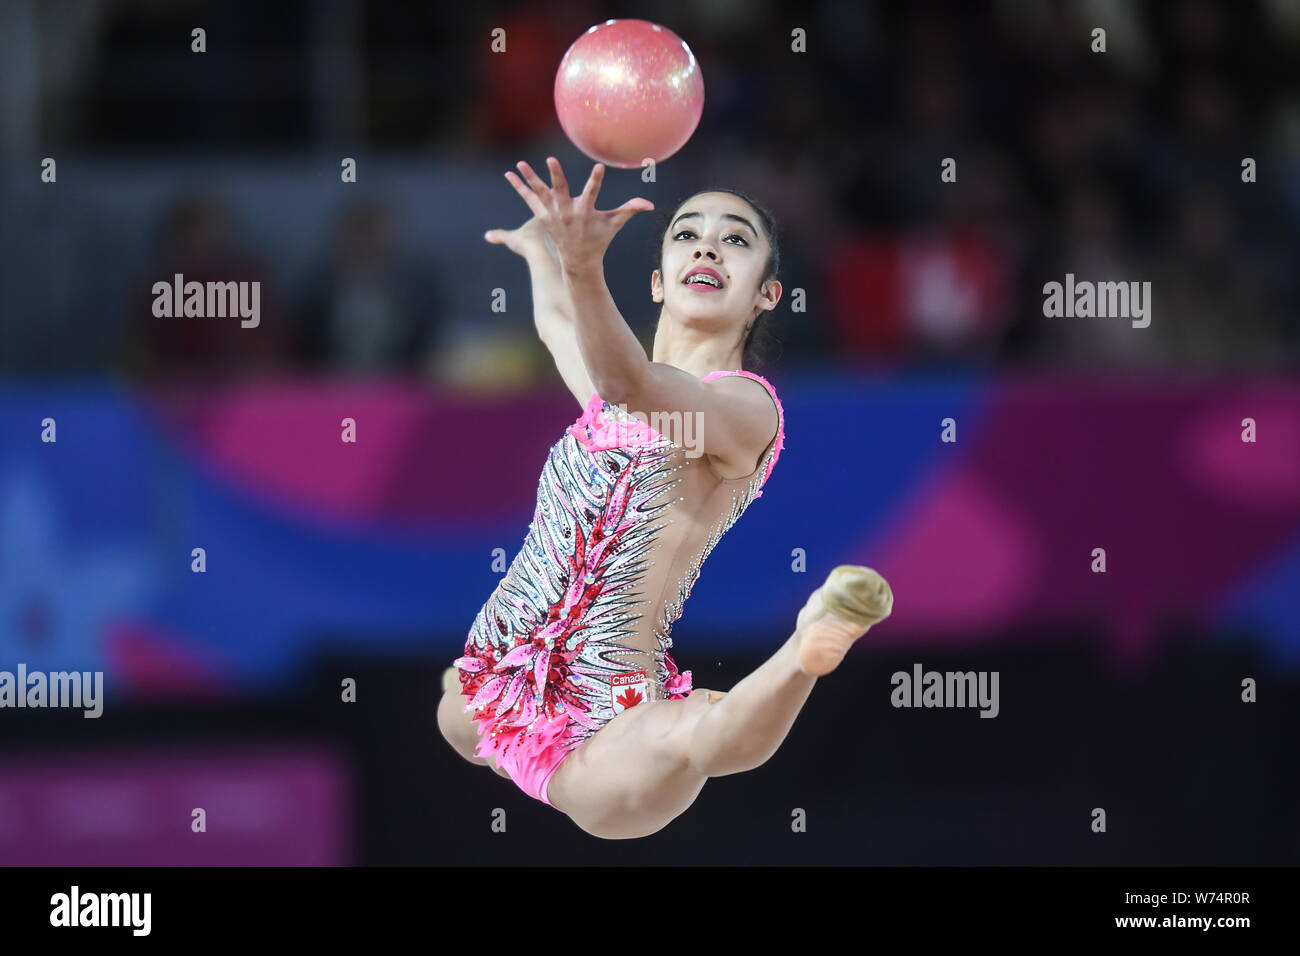 Lima, Peru. 4th Aug, 2019. NATALIE GARCIA from Canada does a leap with the ball during the competition held in the Polideportivo Villa El Salvador in Lima, Peru. Credit: Amy Sanderson/ZUMA Wire/Alamy Live News Stock Photo